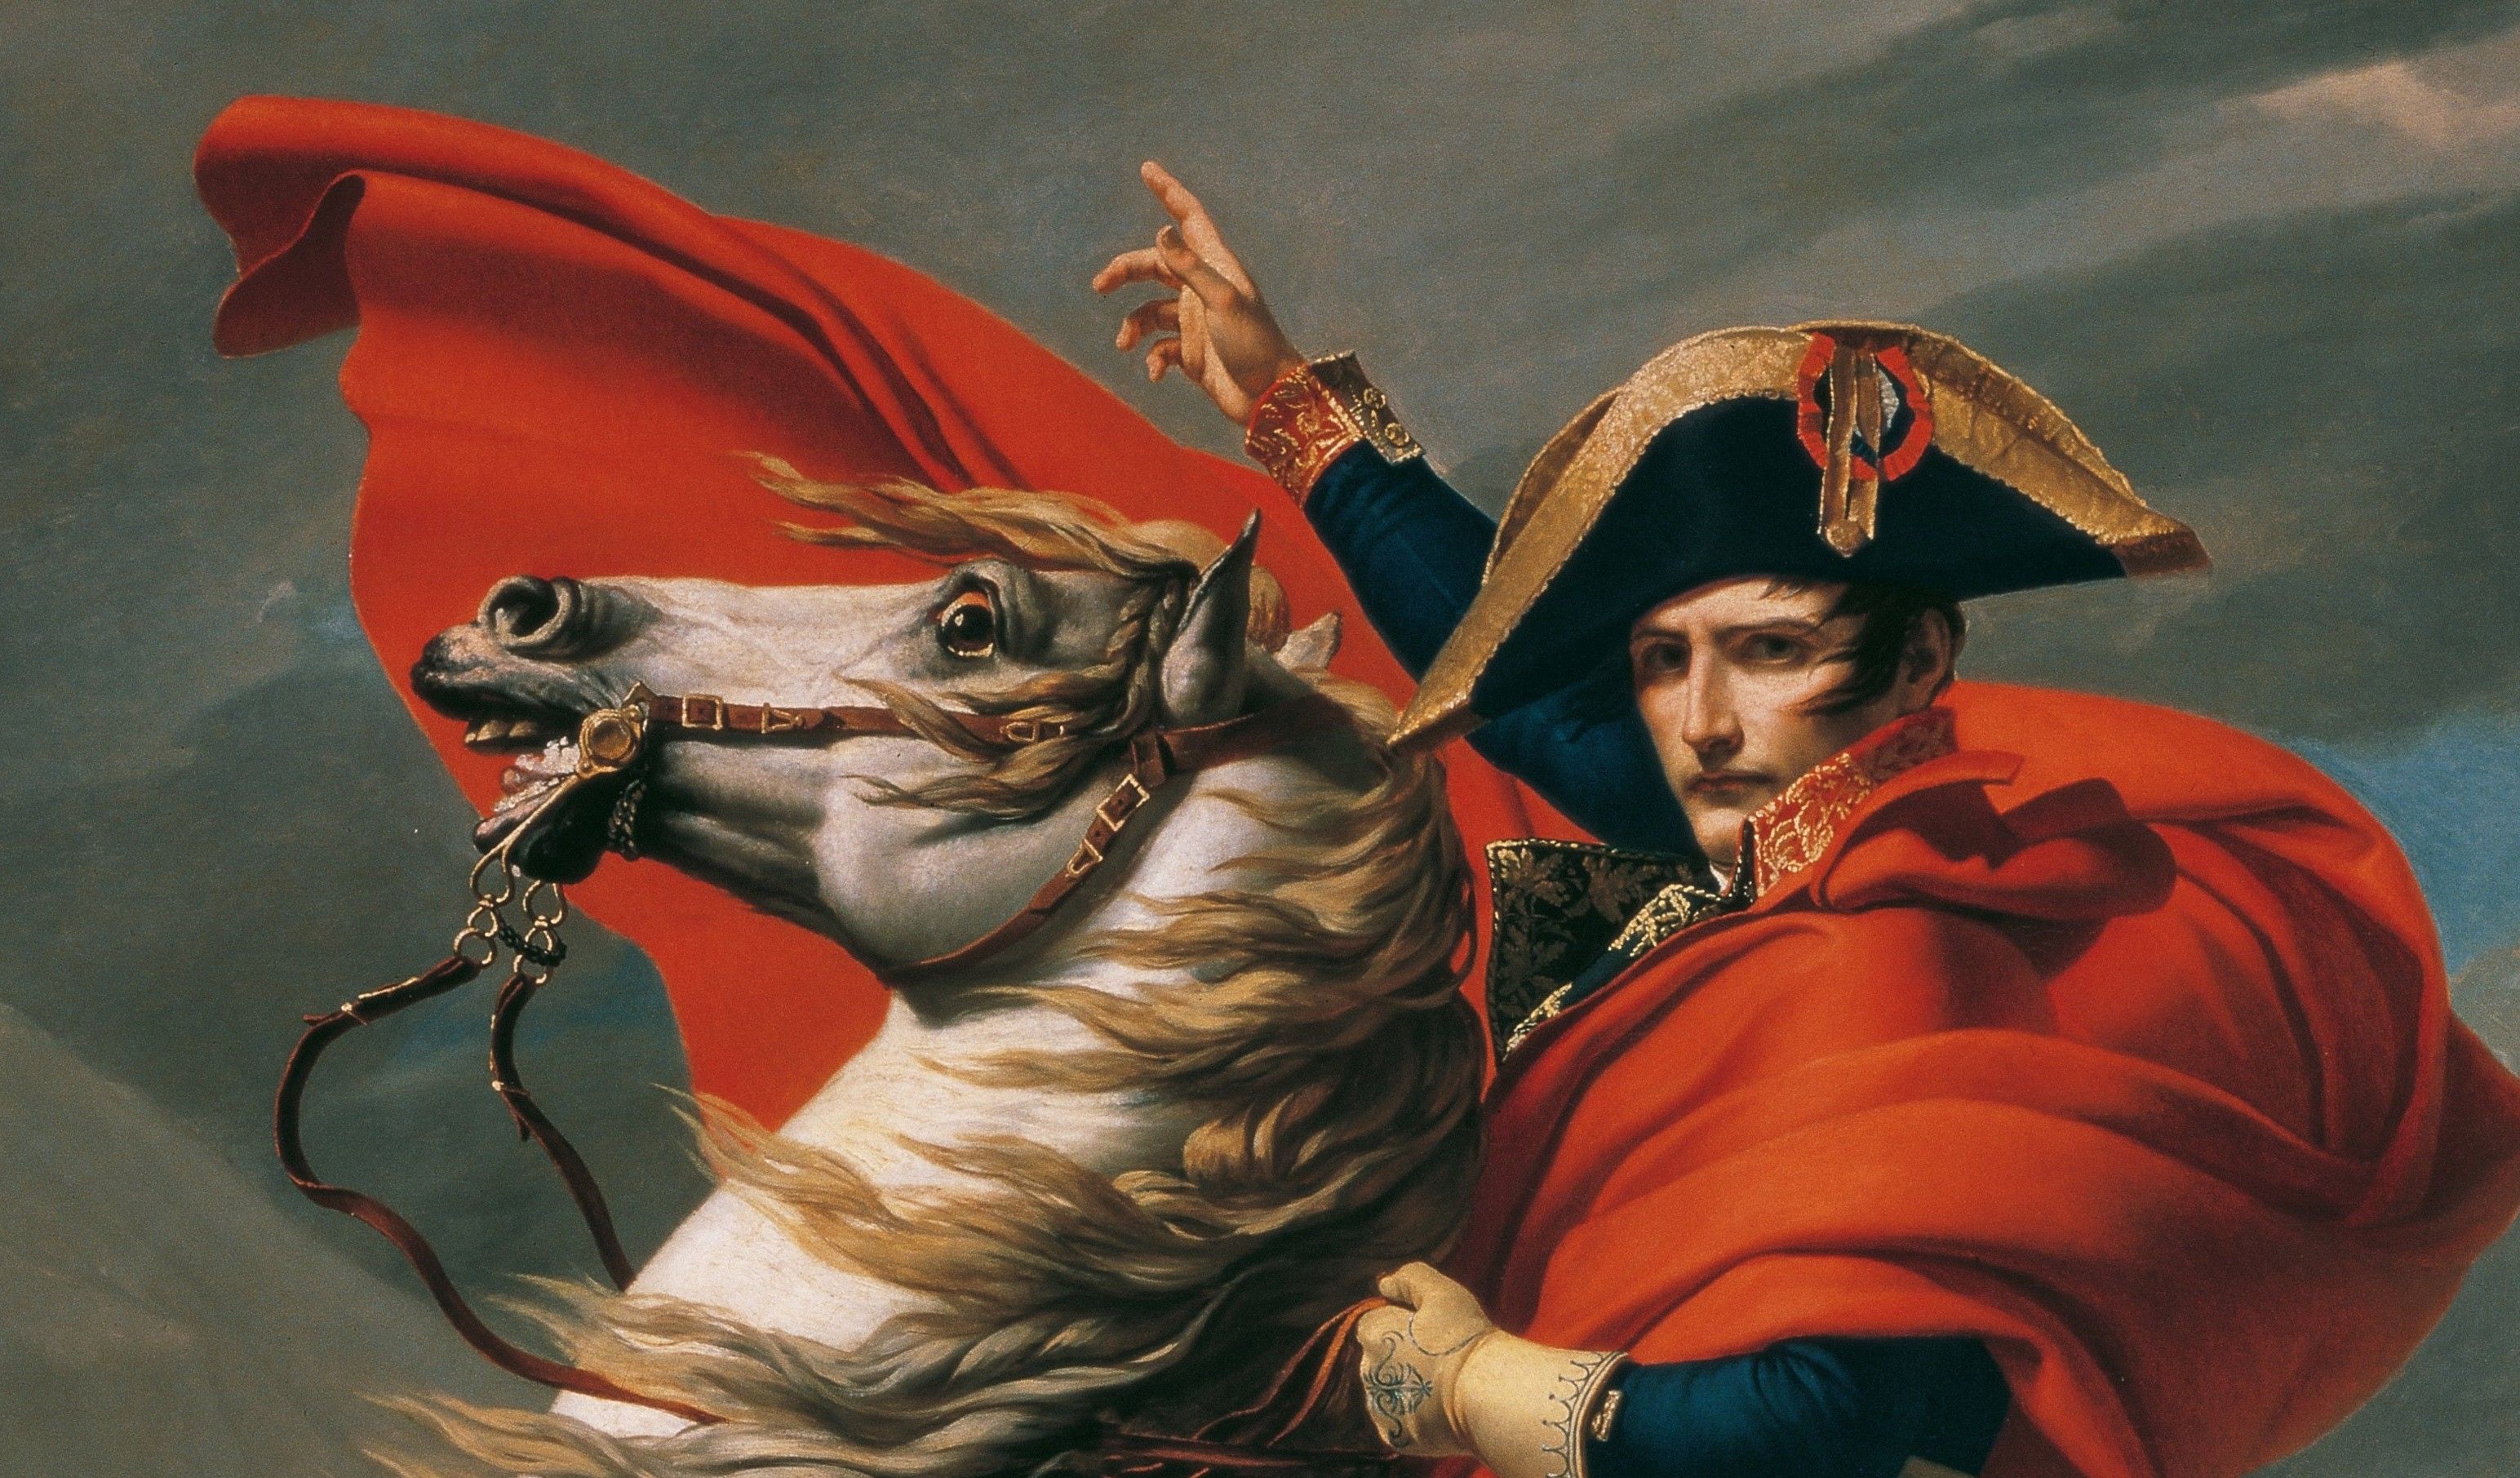 Watch Here Are More Famous Paintings That Inspired Great Filmmakers